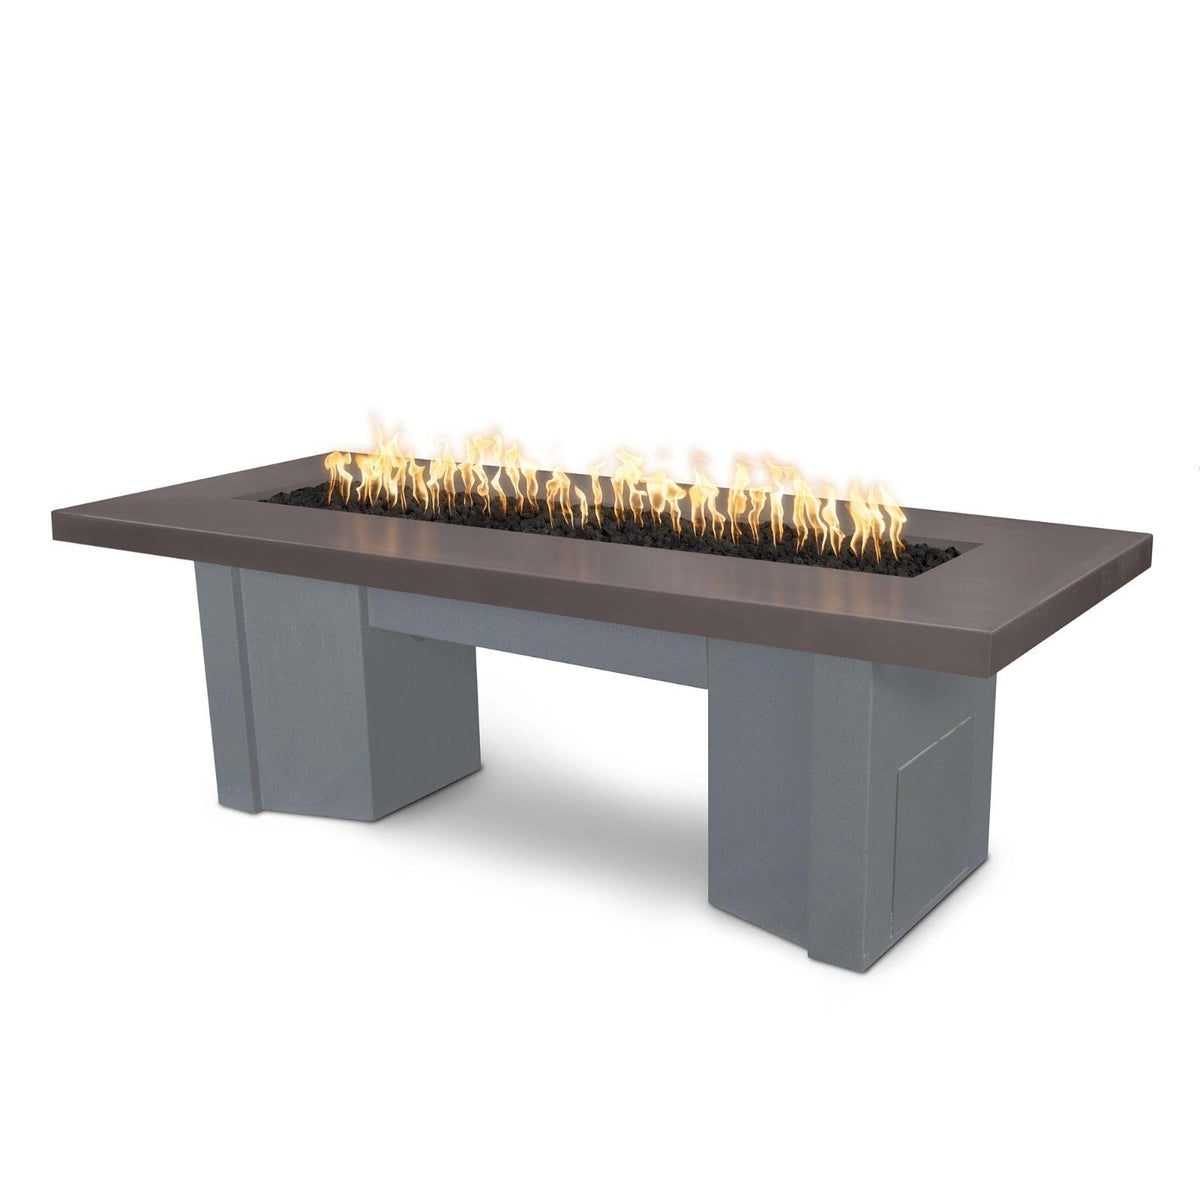 The Outdoor Plus Fire Features Chestnut (-CST) / Gray Powder Coated Steel (-GRY) The Outdoor Plus 78&quot; Alameda Fire Table Smooth Concrete in Liquid Propane - Match Lit with Flame Sense System / OPT-ALMGFRC78FSML-LP